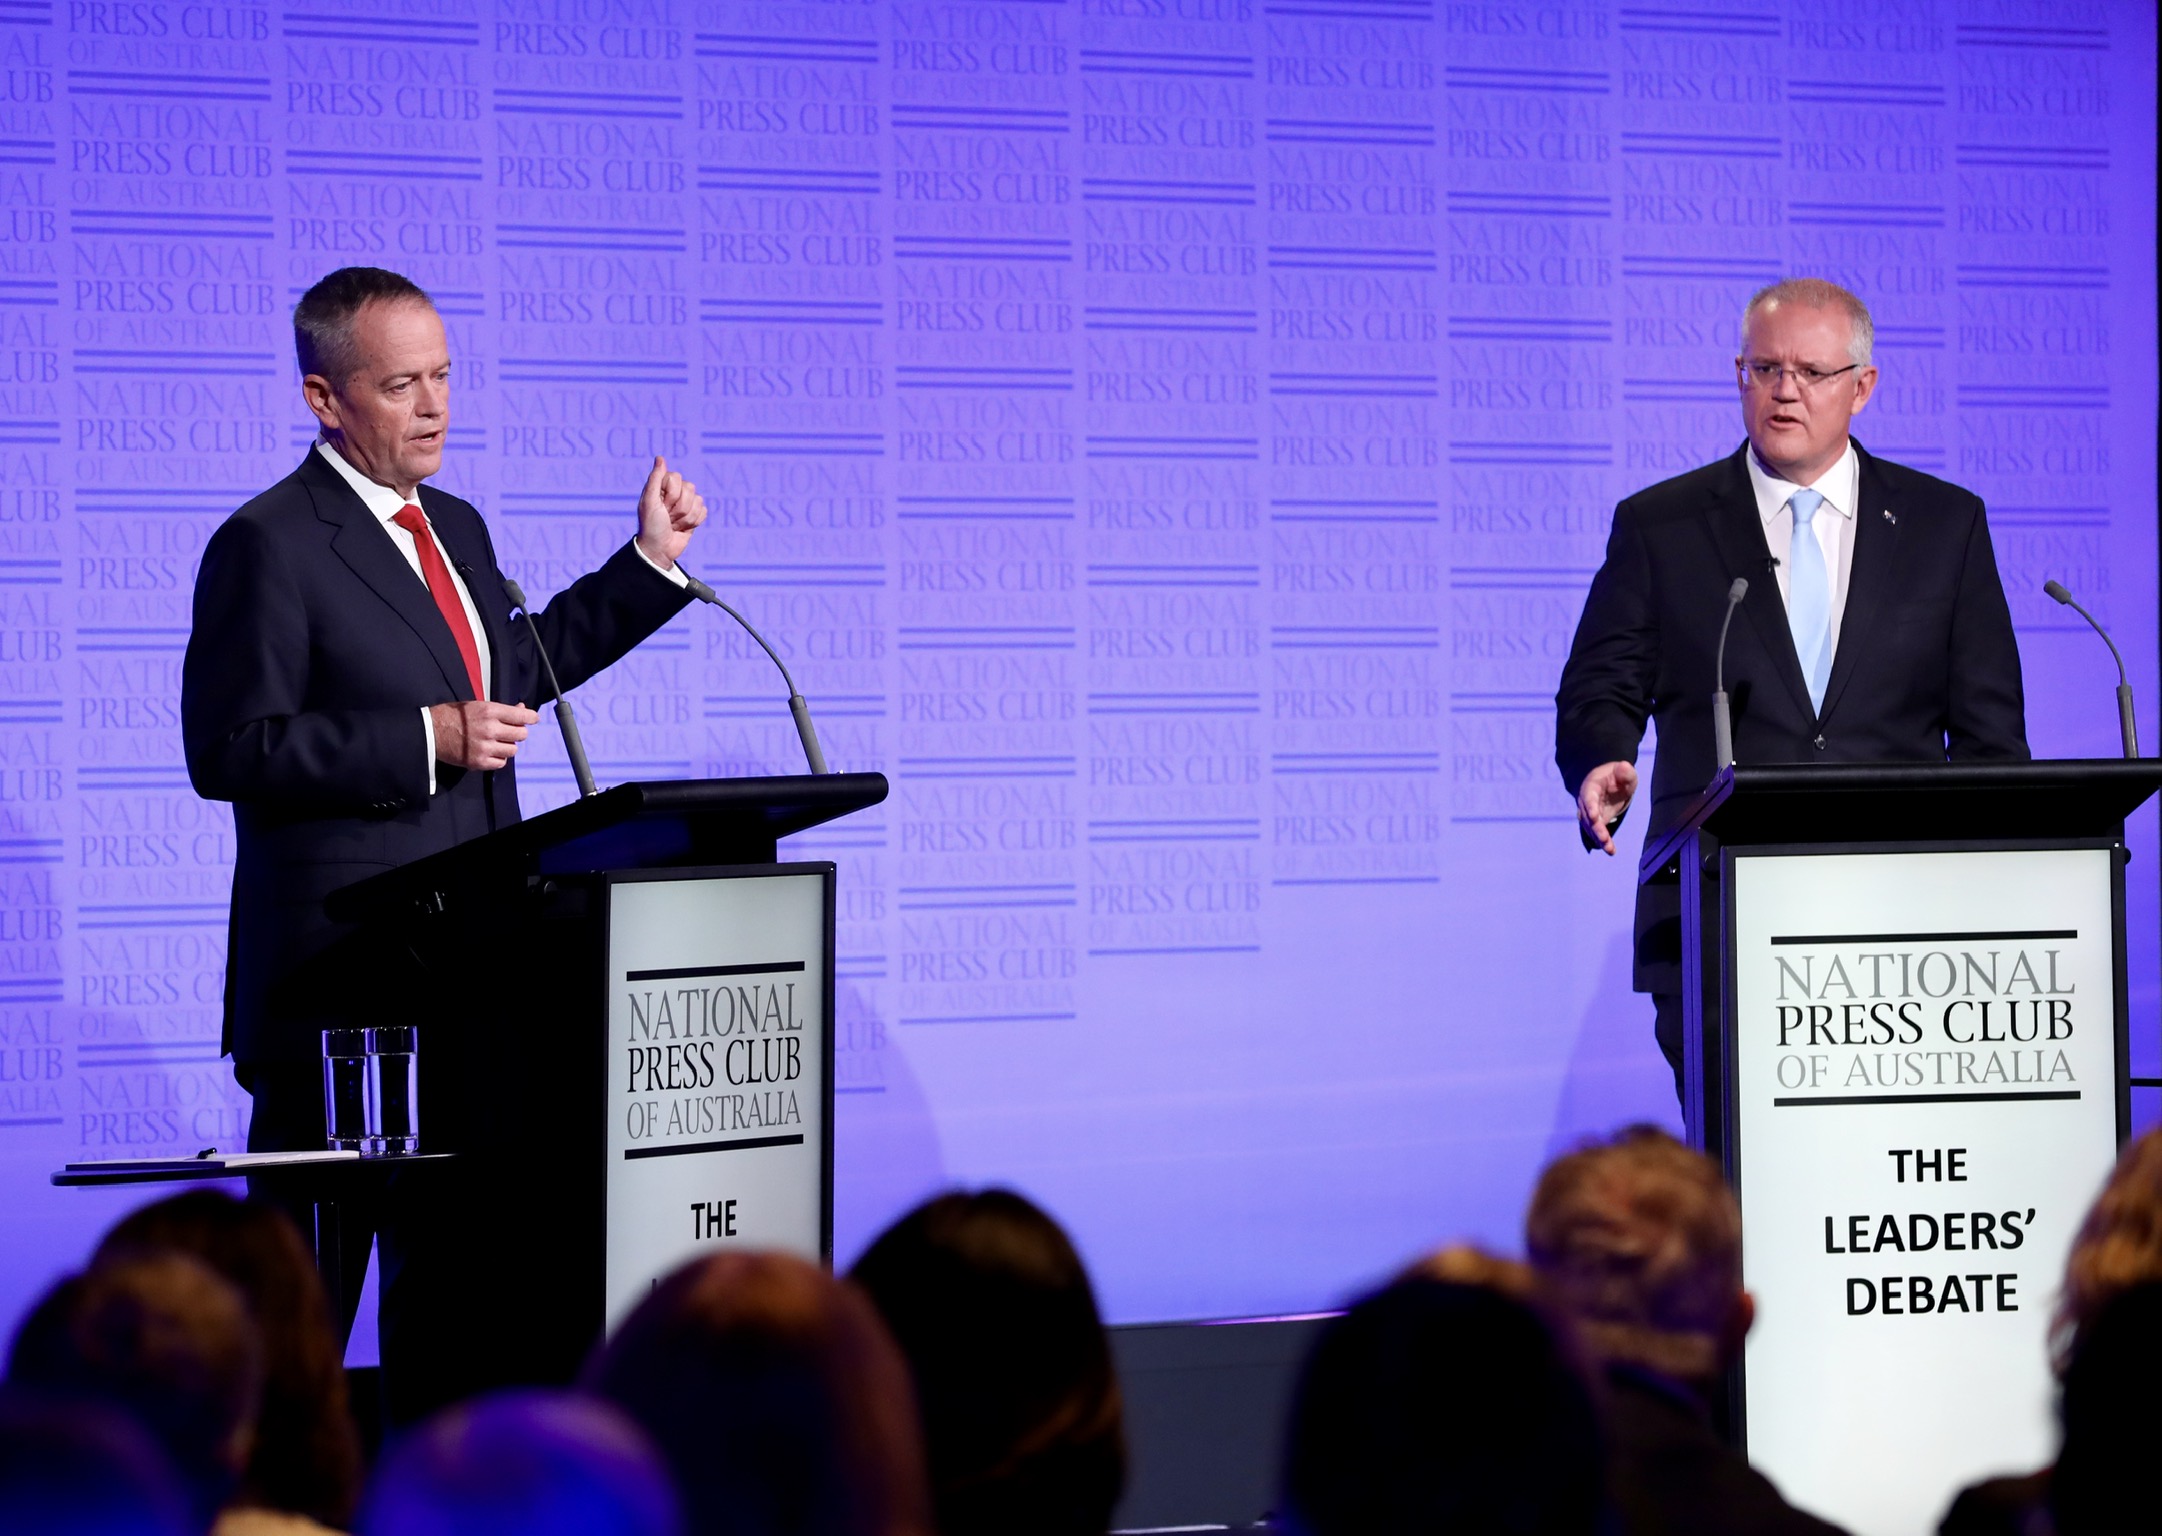 Prime Minister Scott Morrison and Labor leader Bill Shorten take part in “The Leaders’ Debate’’ at the National Press Club on May 8, 2019 in Canberra, Australia.